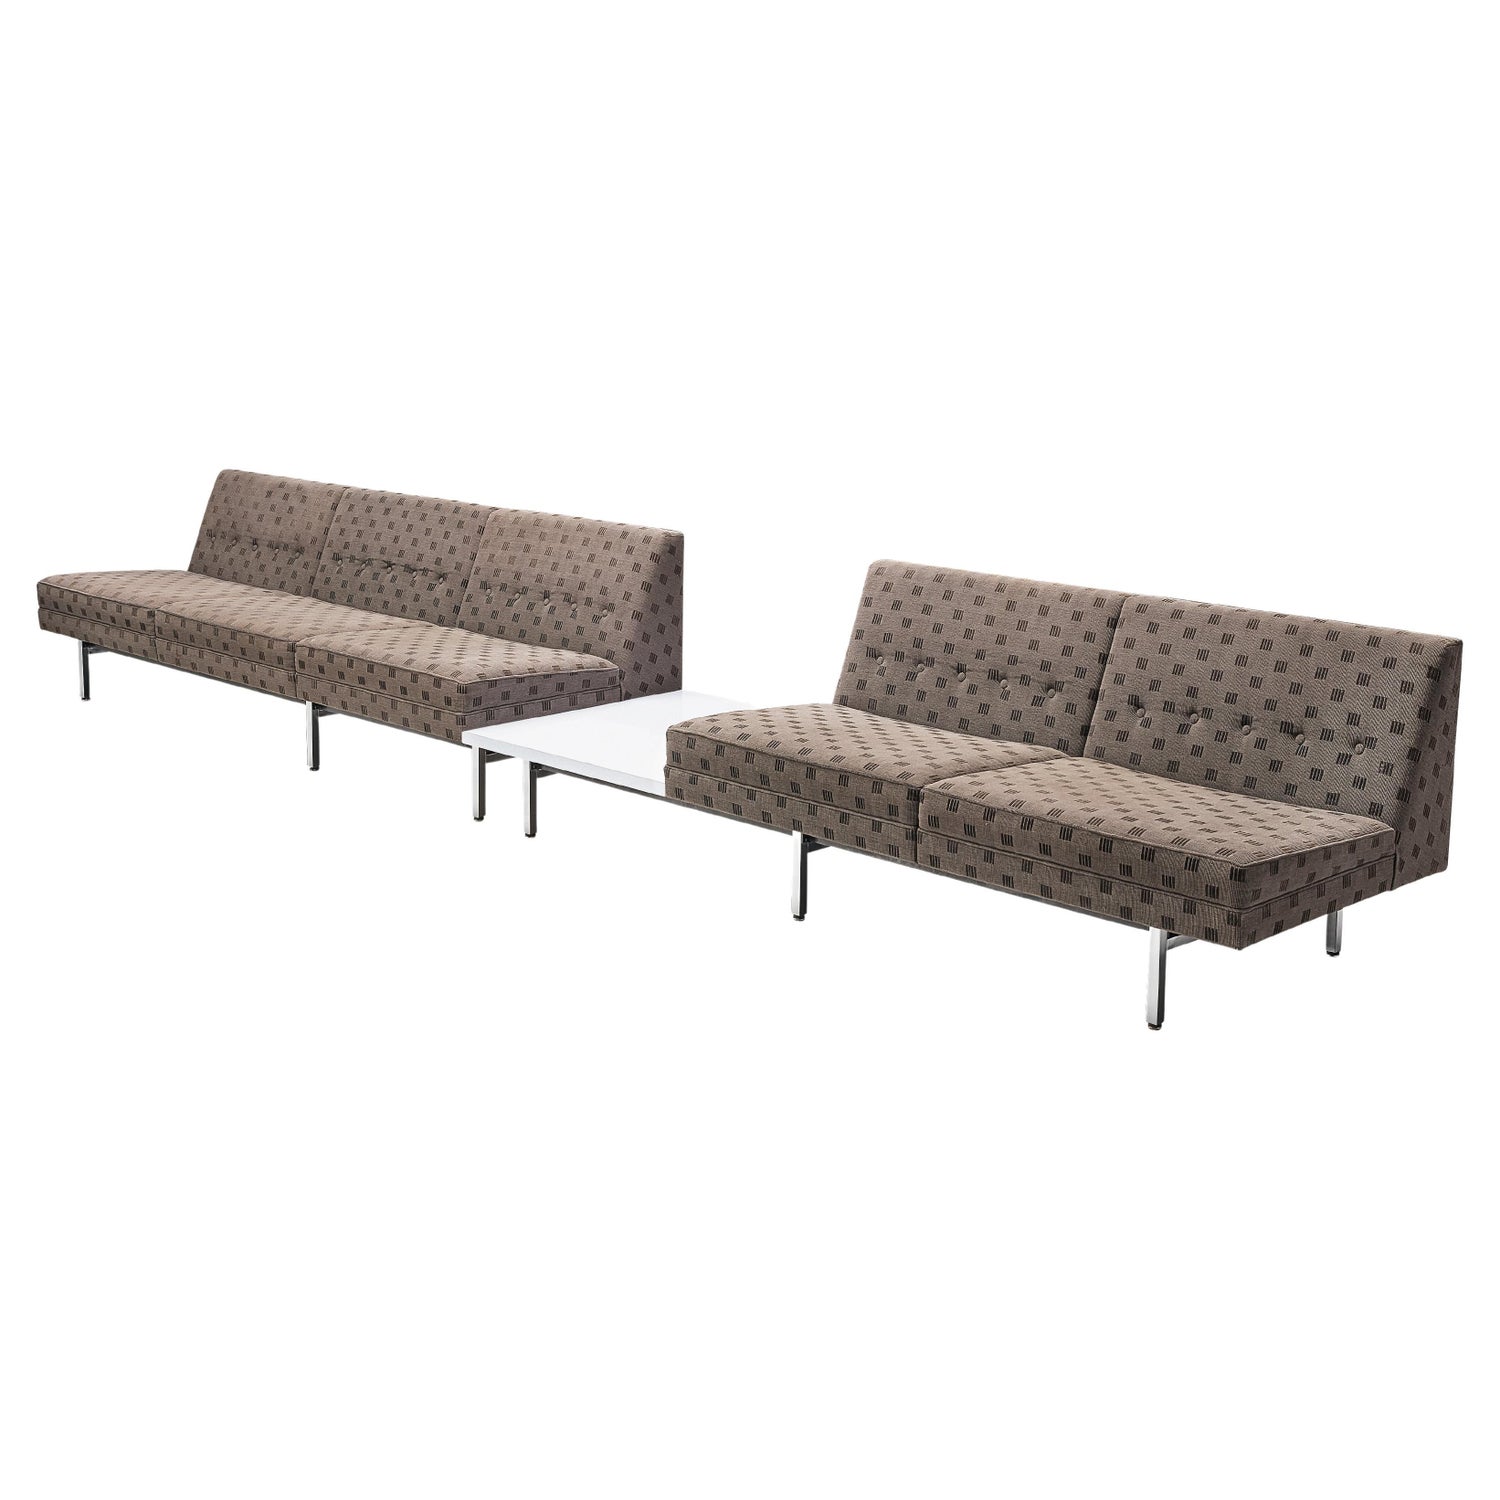 George Nelson Modular Group Sofa For Sale at 1stDibs | george nelson  modular sofa